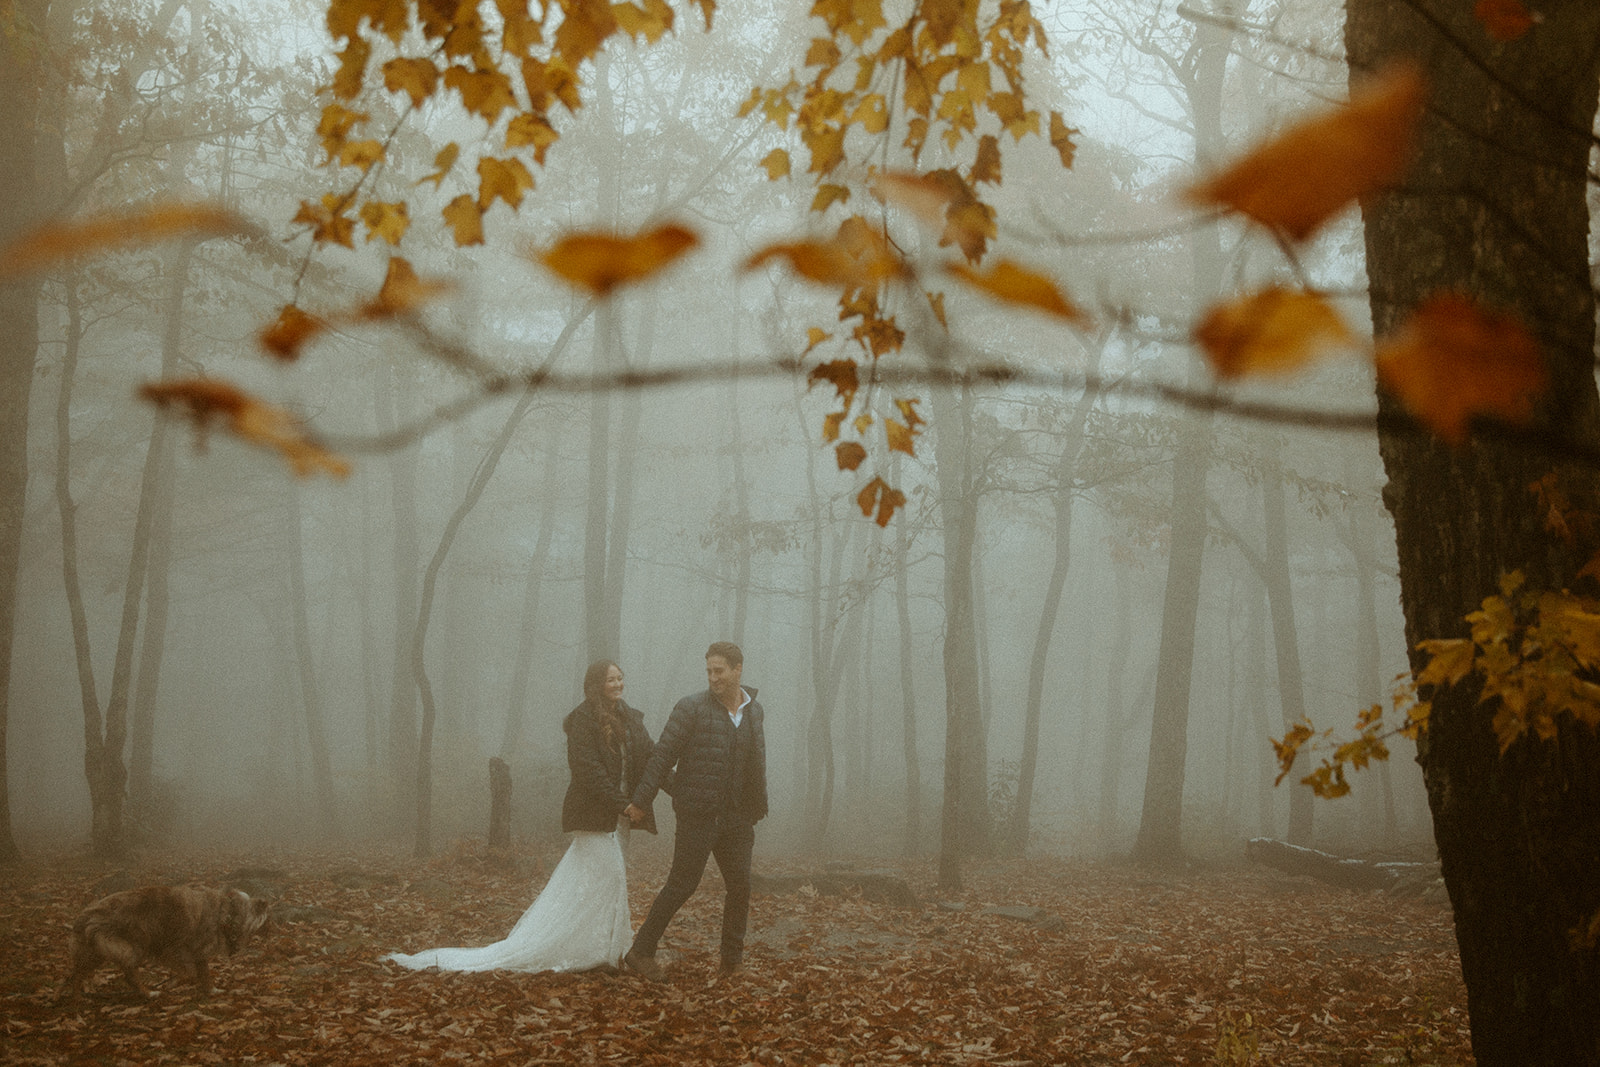 A couple in wedding attire stand in a foggy forest during their winter elopement.